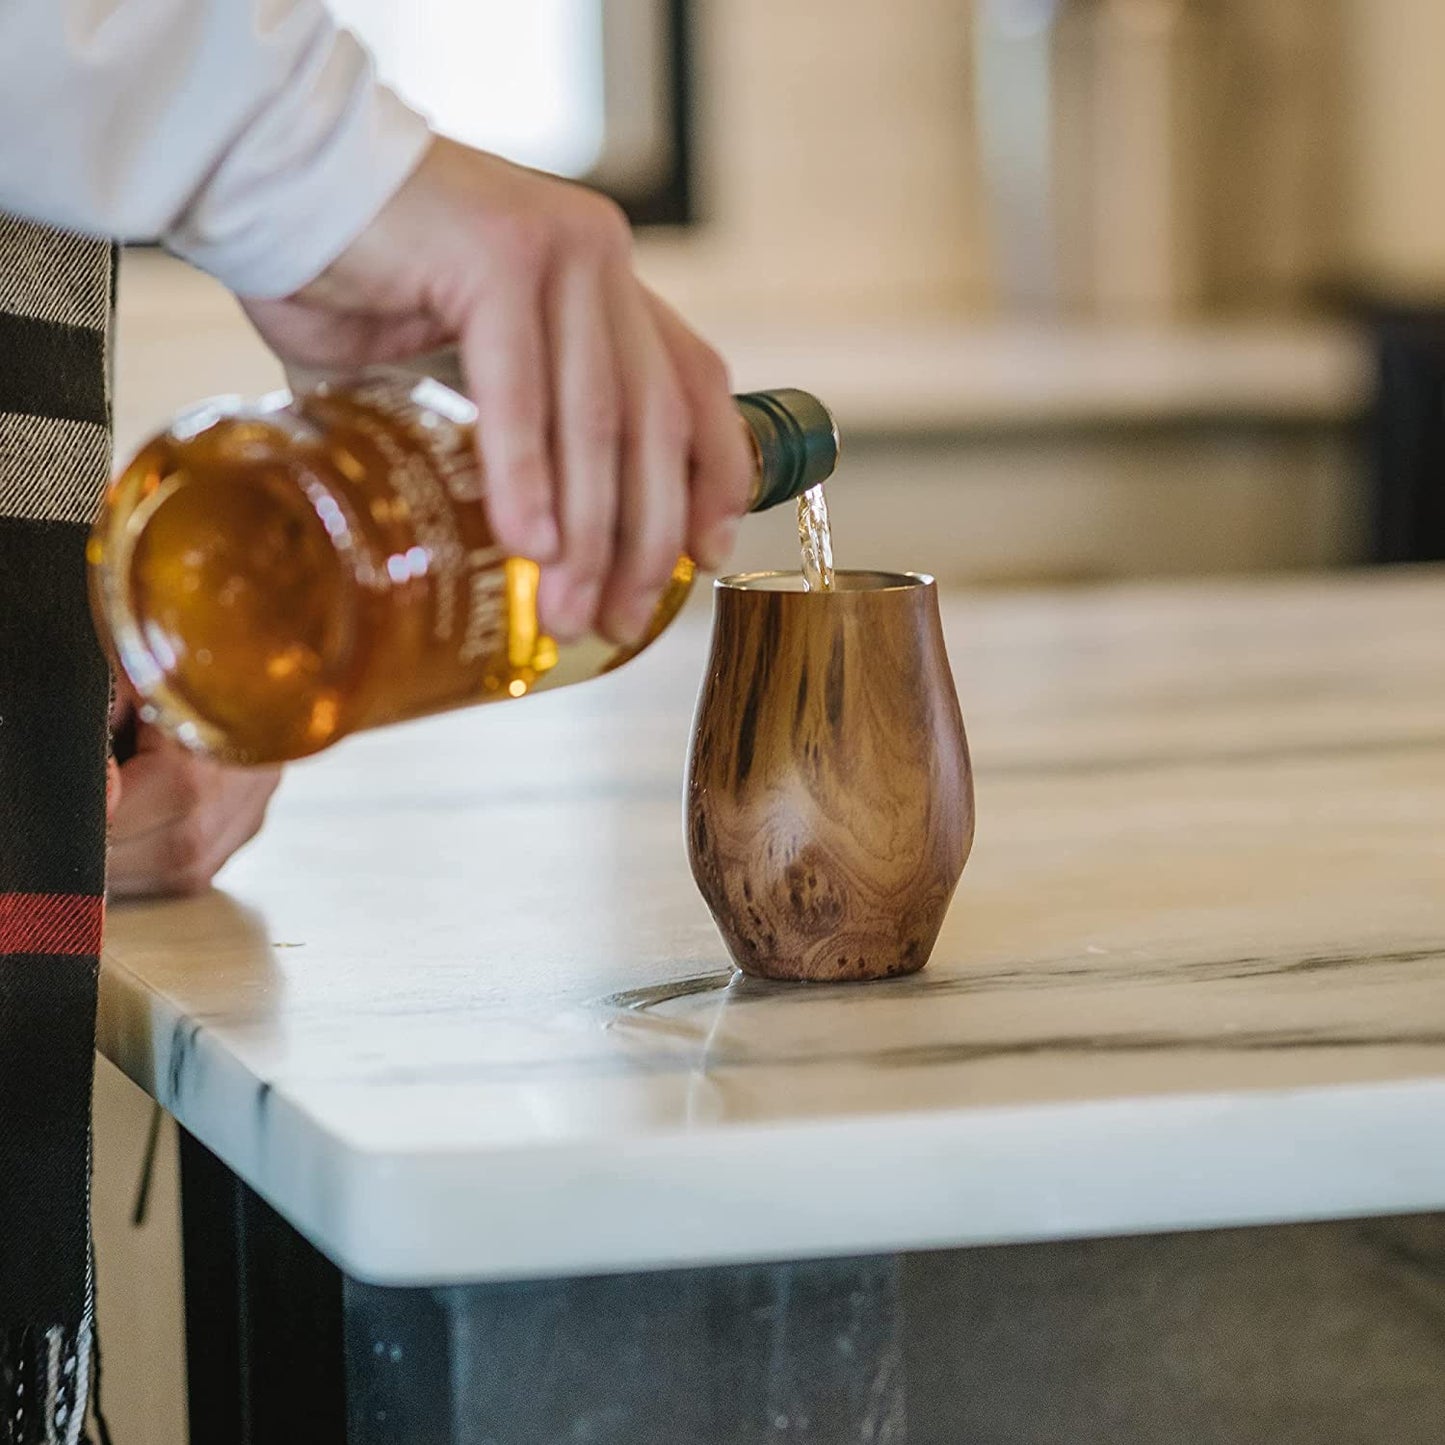 A hand is pouring some whiskey into a whiskey nosing glass.